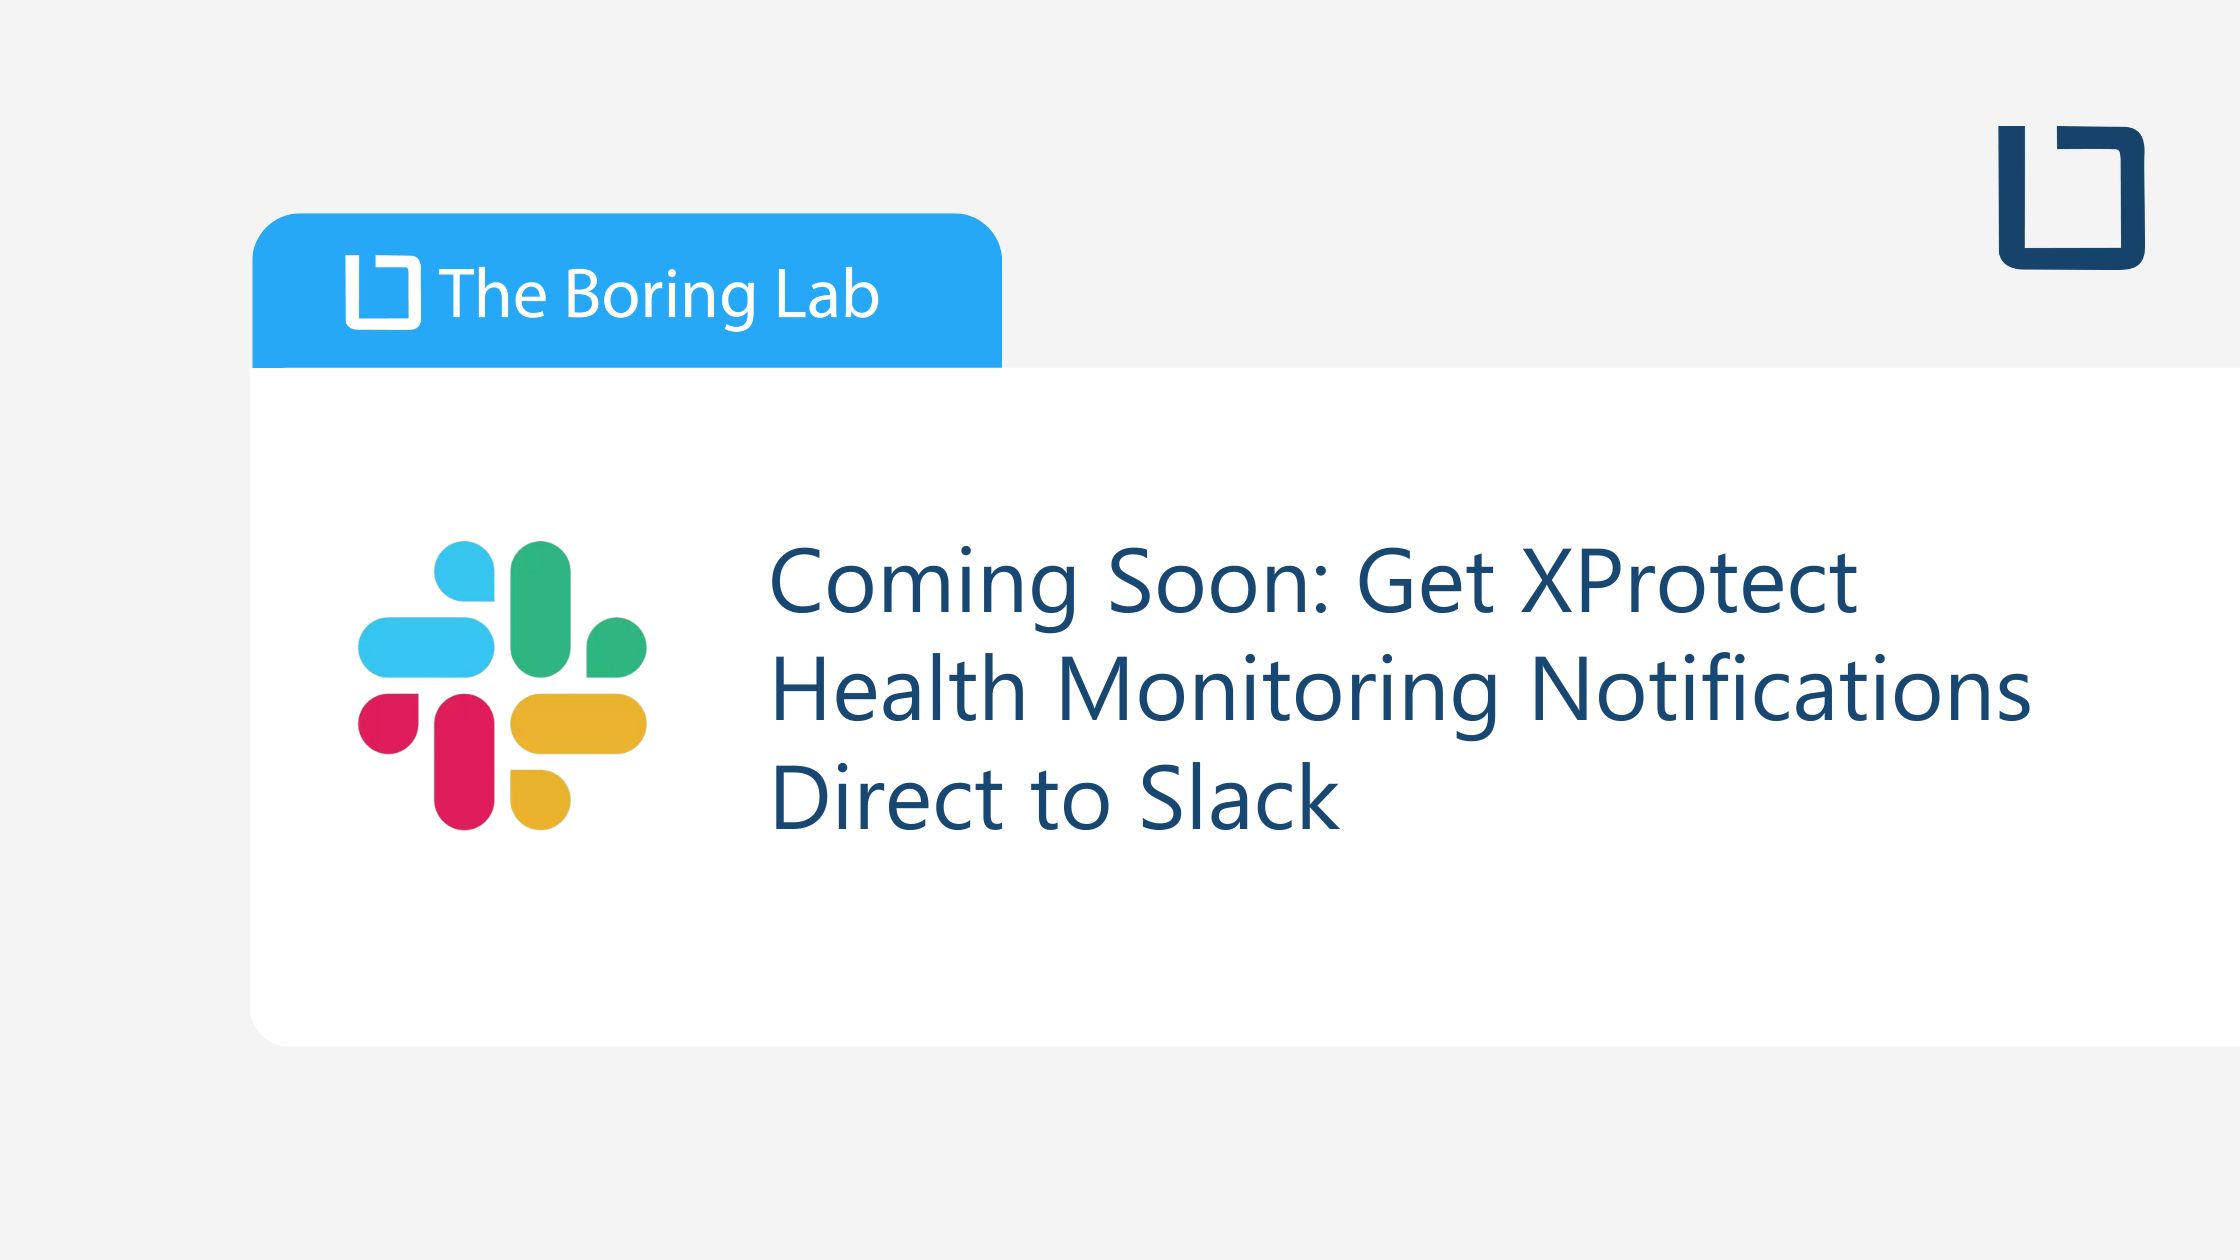 Coming Soon: Get XProtect Health Monitoring Notifications Direct to Slack